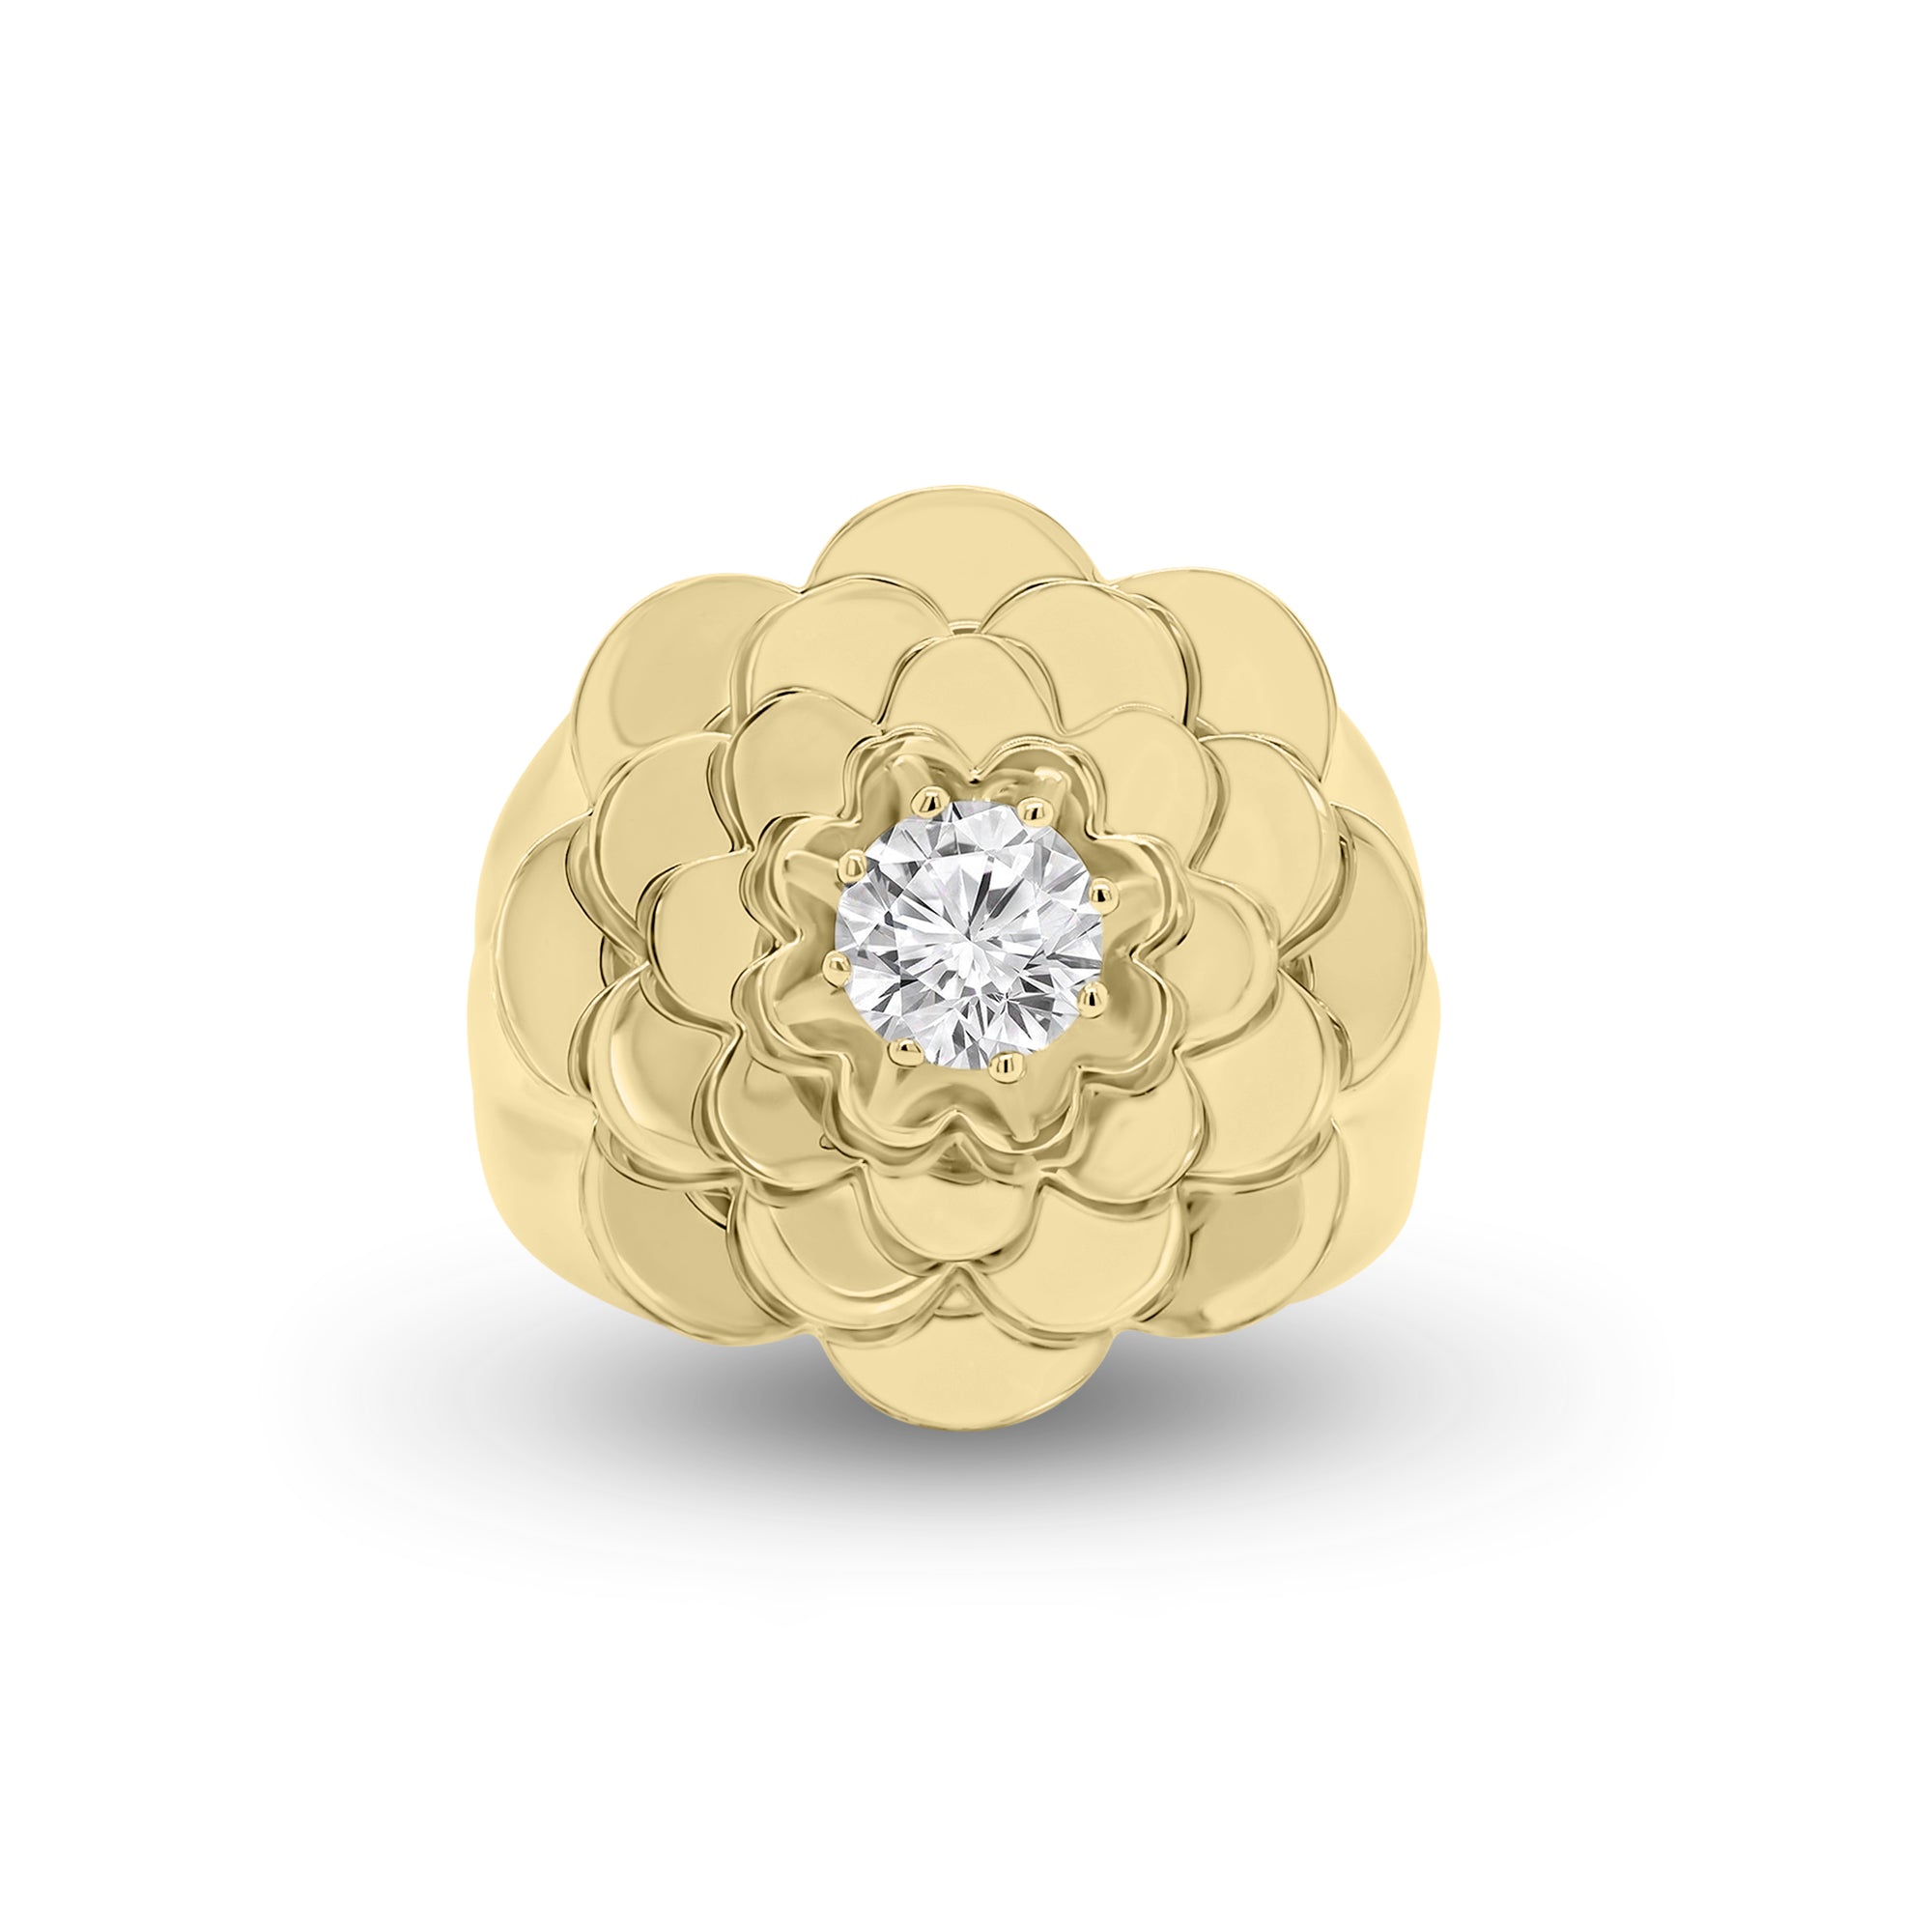 Diamond Bold Flower Ring - 14K gold weighing 10.19 grams  - 48 round diamonds weighing 0.18 carats  - 0.52 ct round diamond (GIA-graded H-color, SI2 clarity)